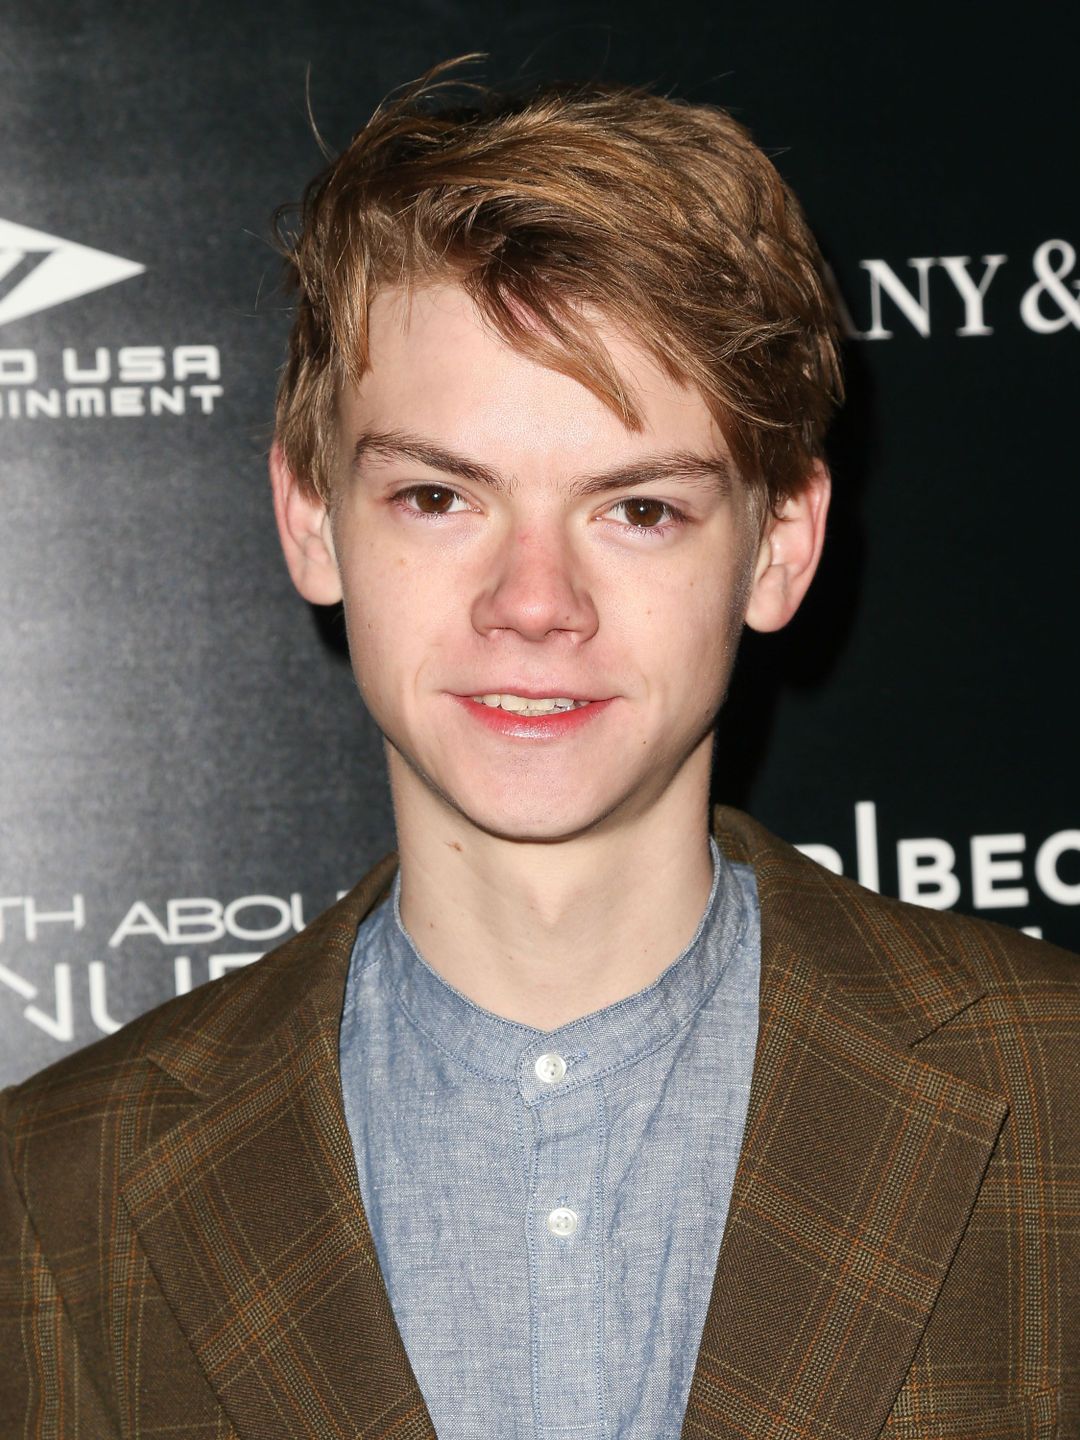 Thomas Sangster young age